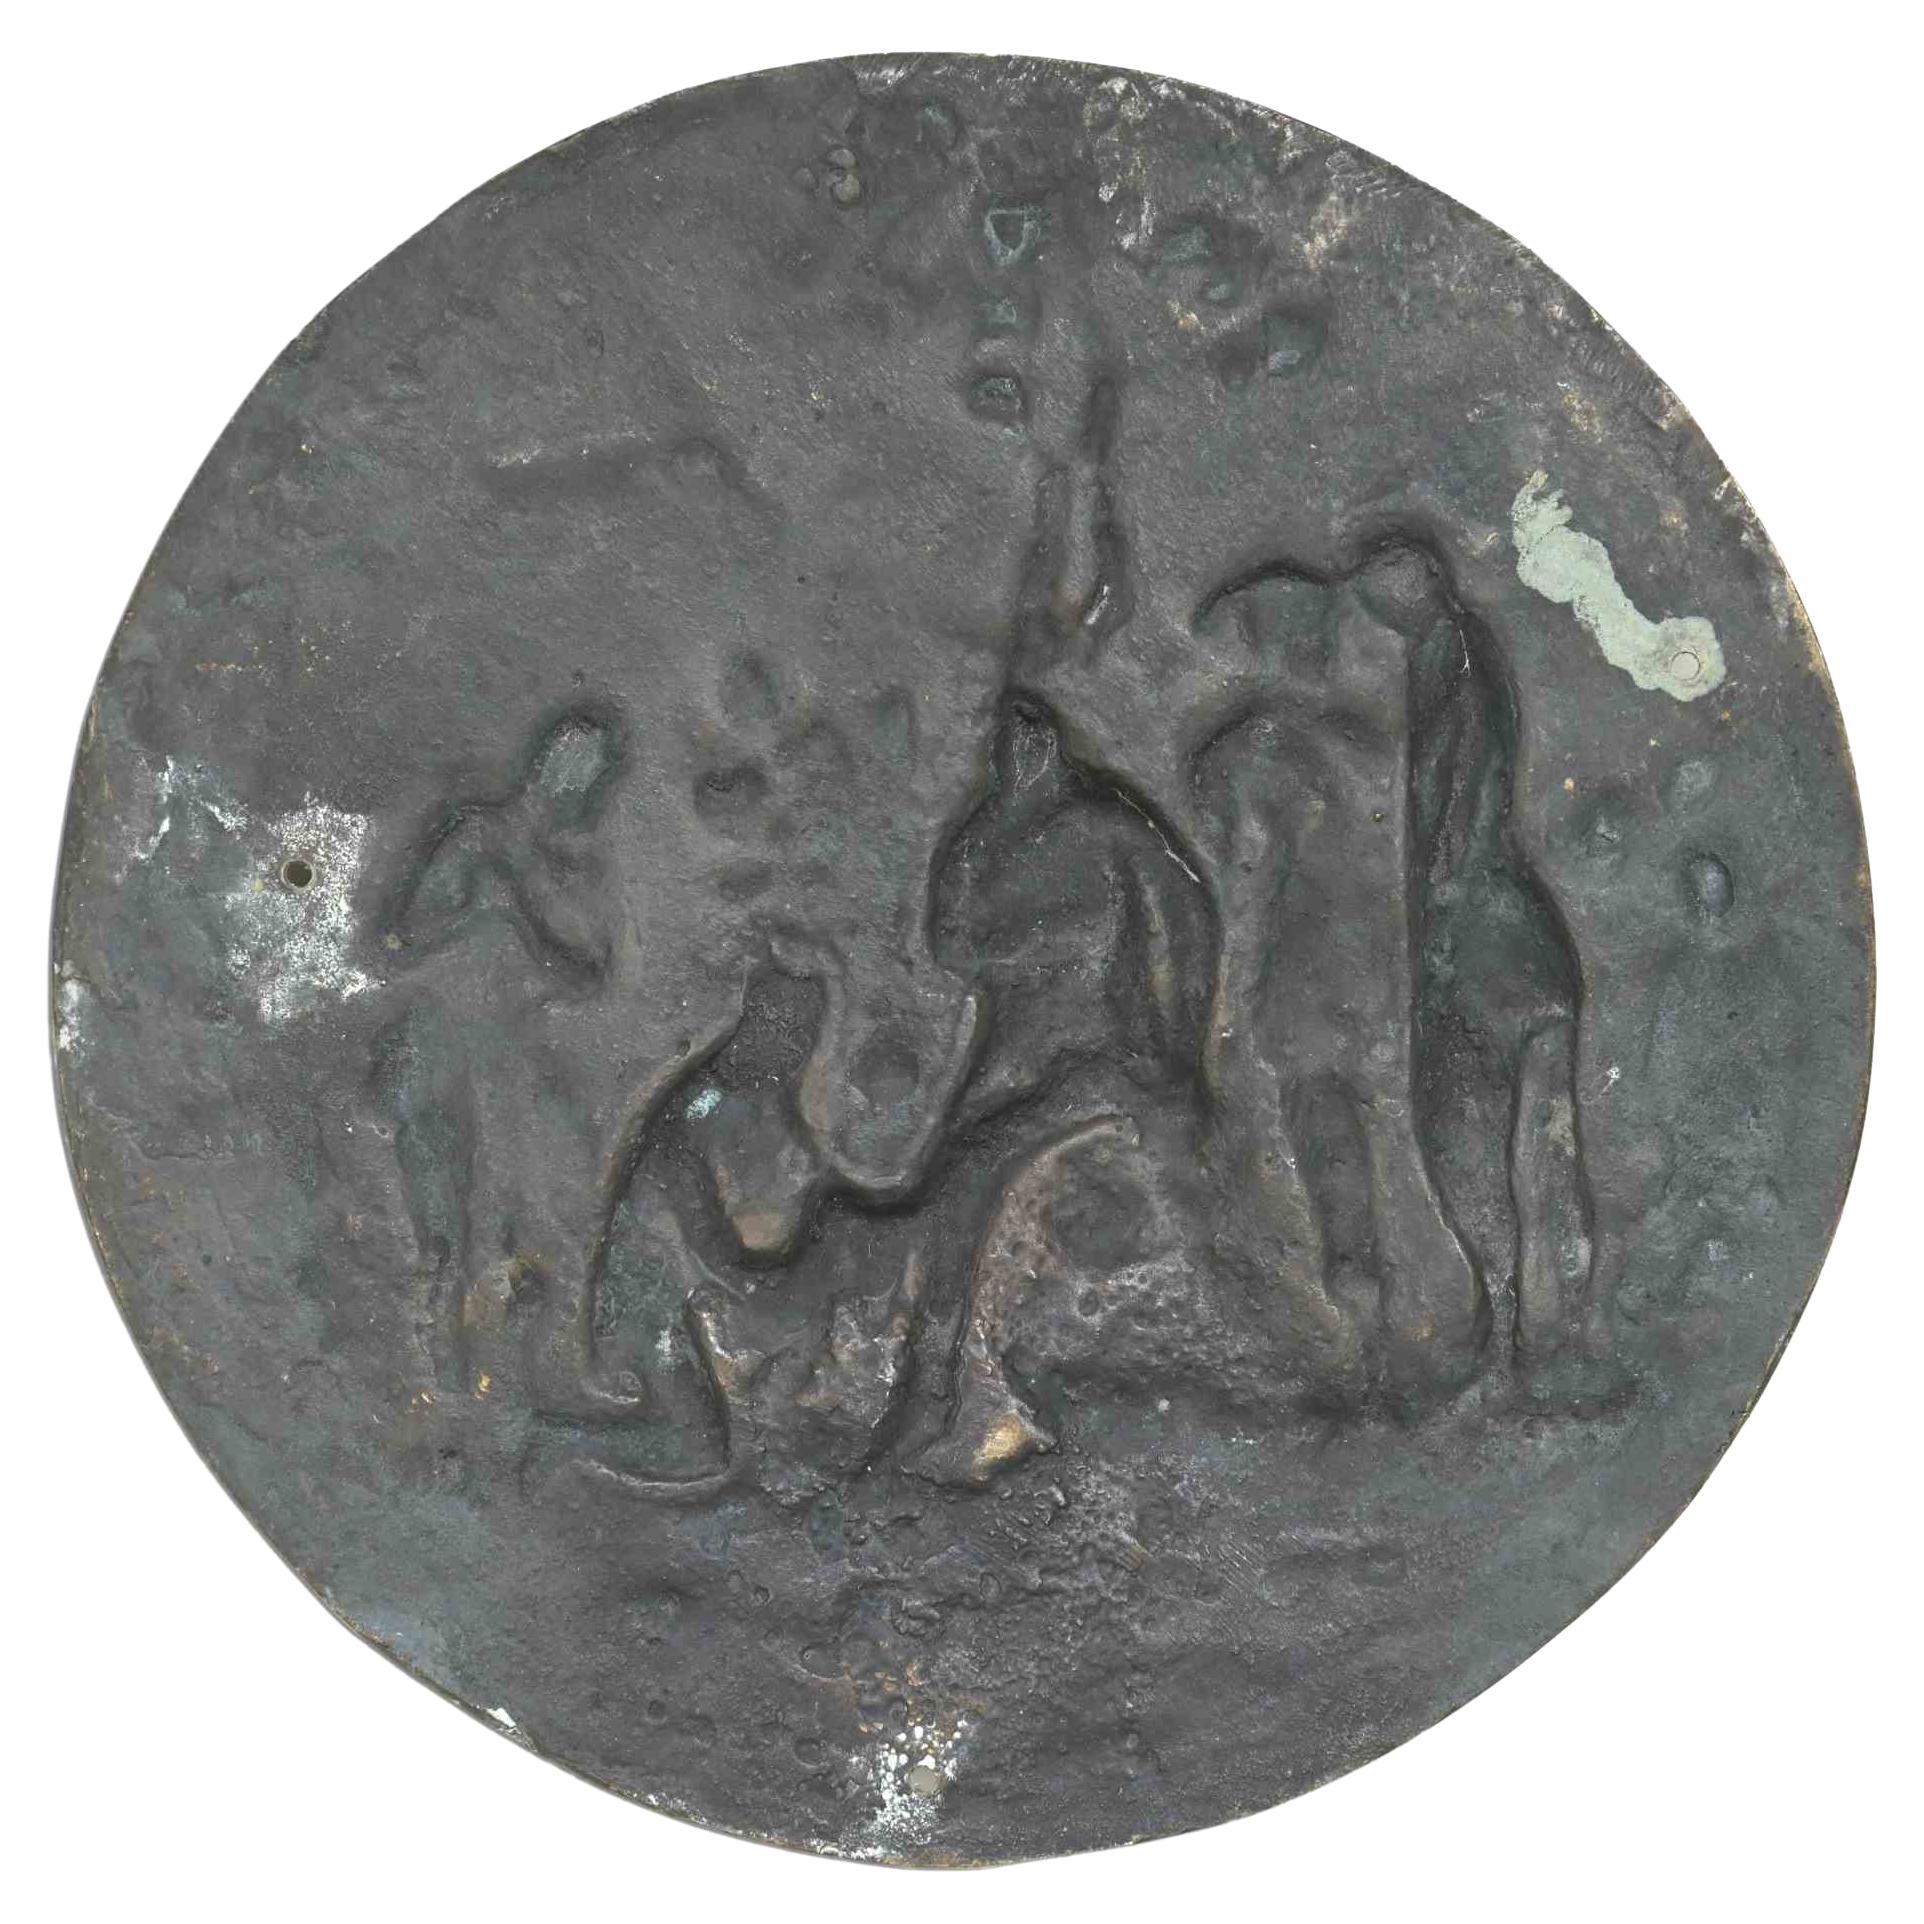 Garibaldi medal is an original bronze medal realized by Artist of late 19th century. 

This bronze medal was realized in the occasion wounding Garibaldi on the Aspromonte, Italy.

Collect this decorative object!